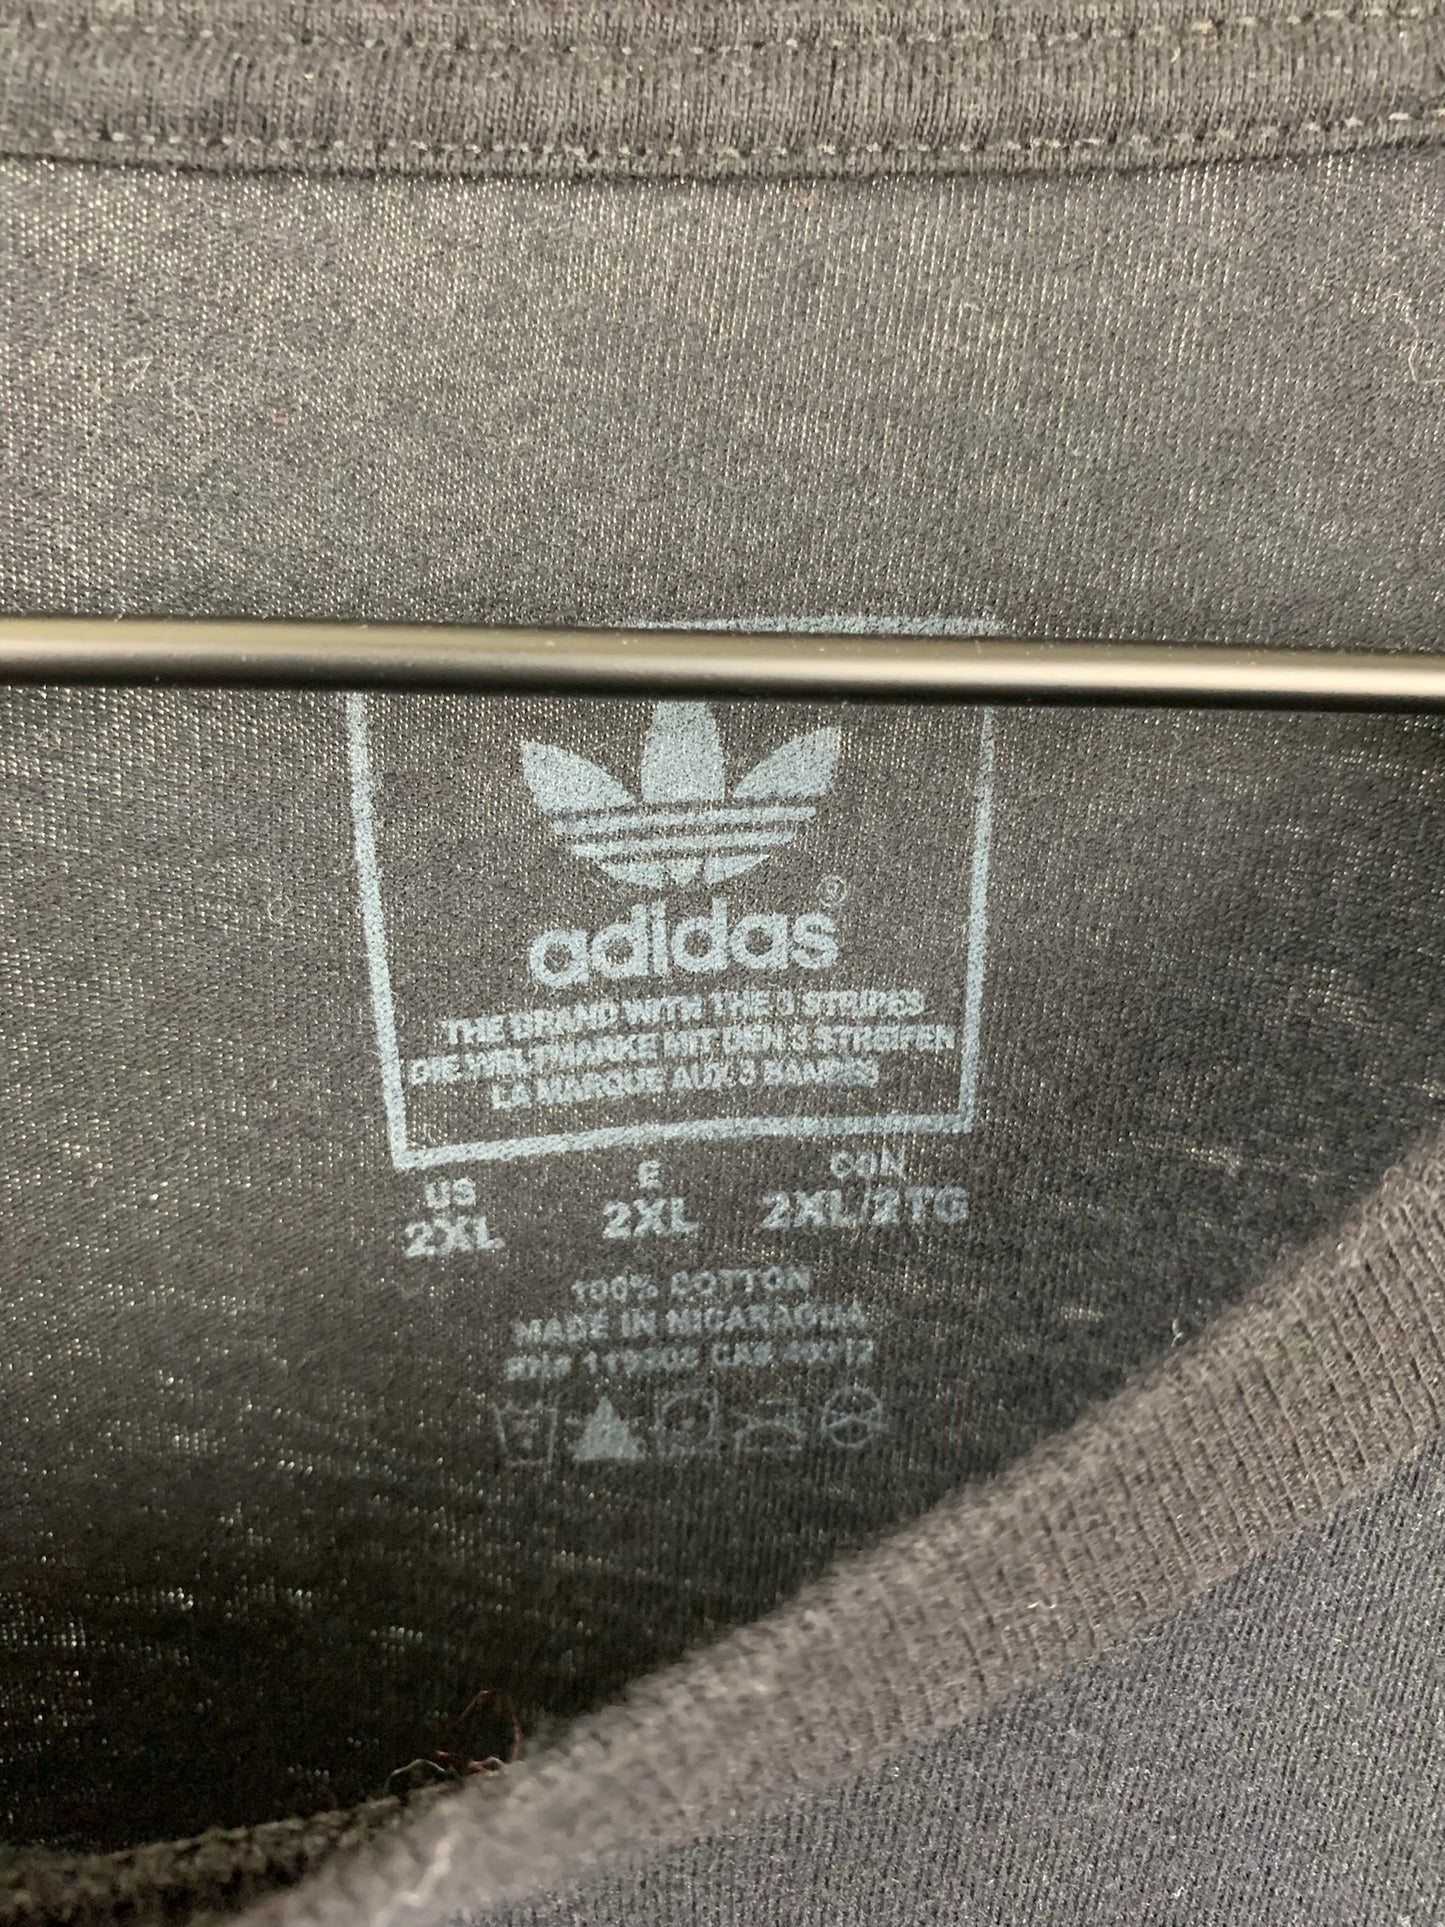 Supplying The Streets By Adidas